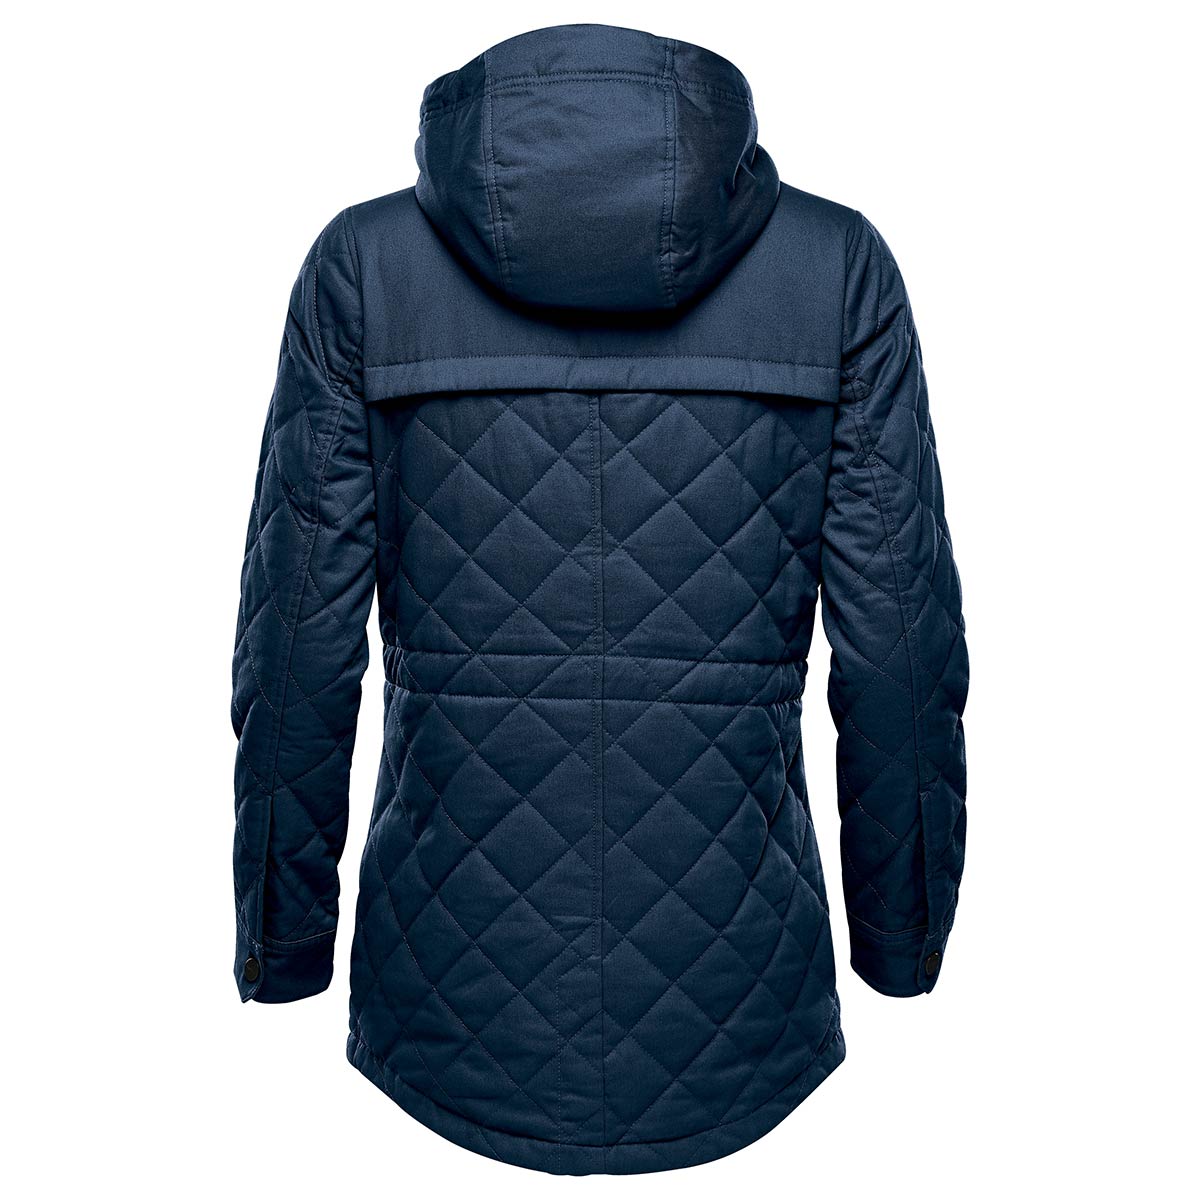 Chaser Brand Women's Quilted Premium Puffer Jacket